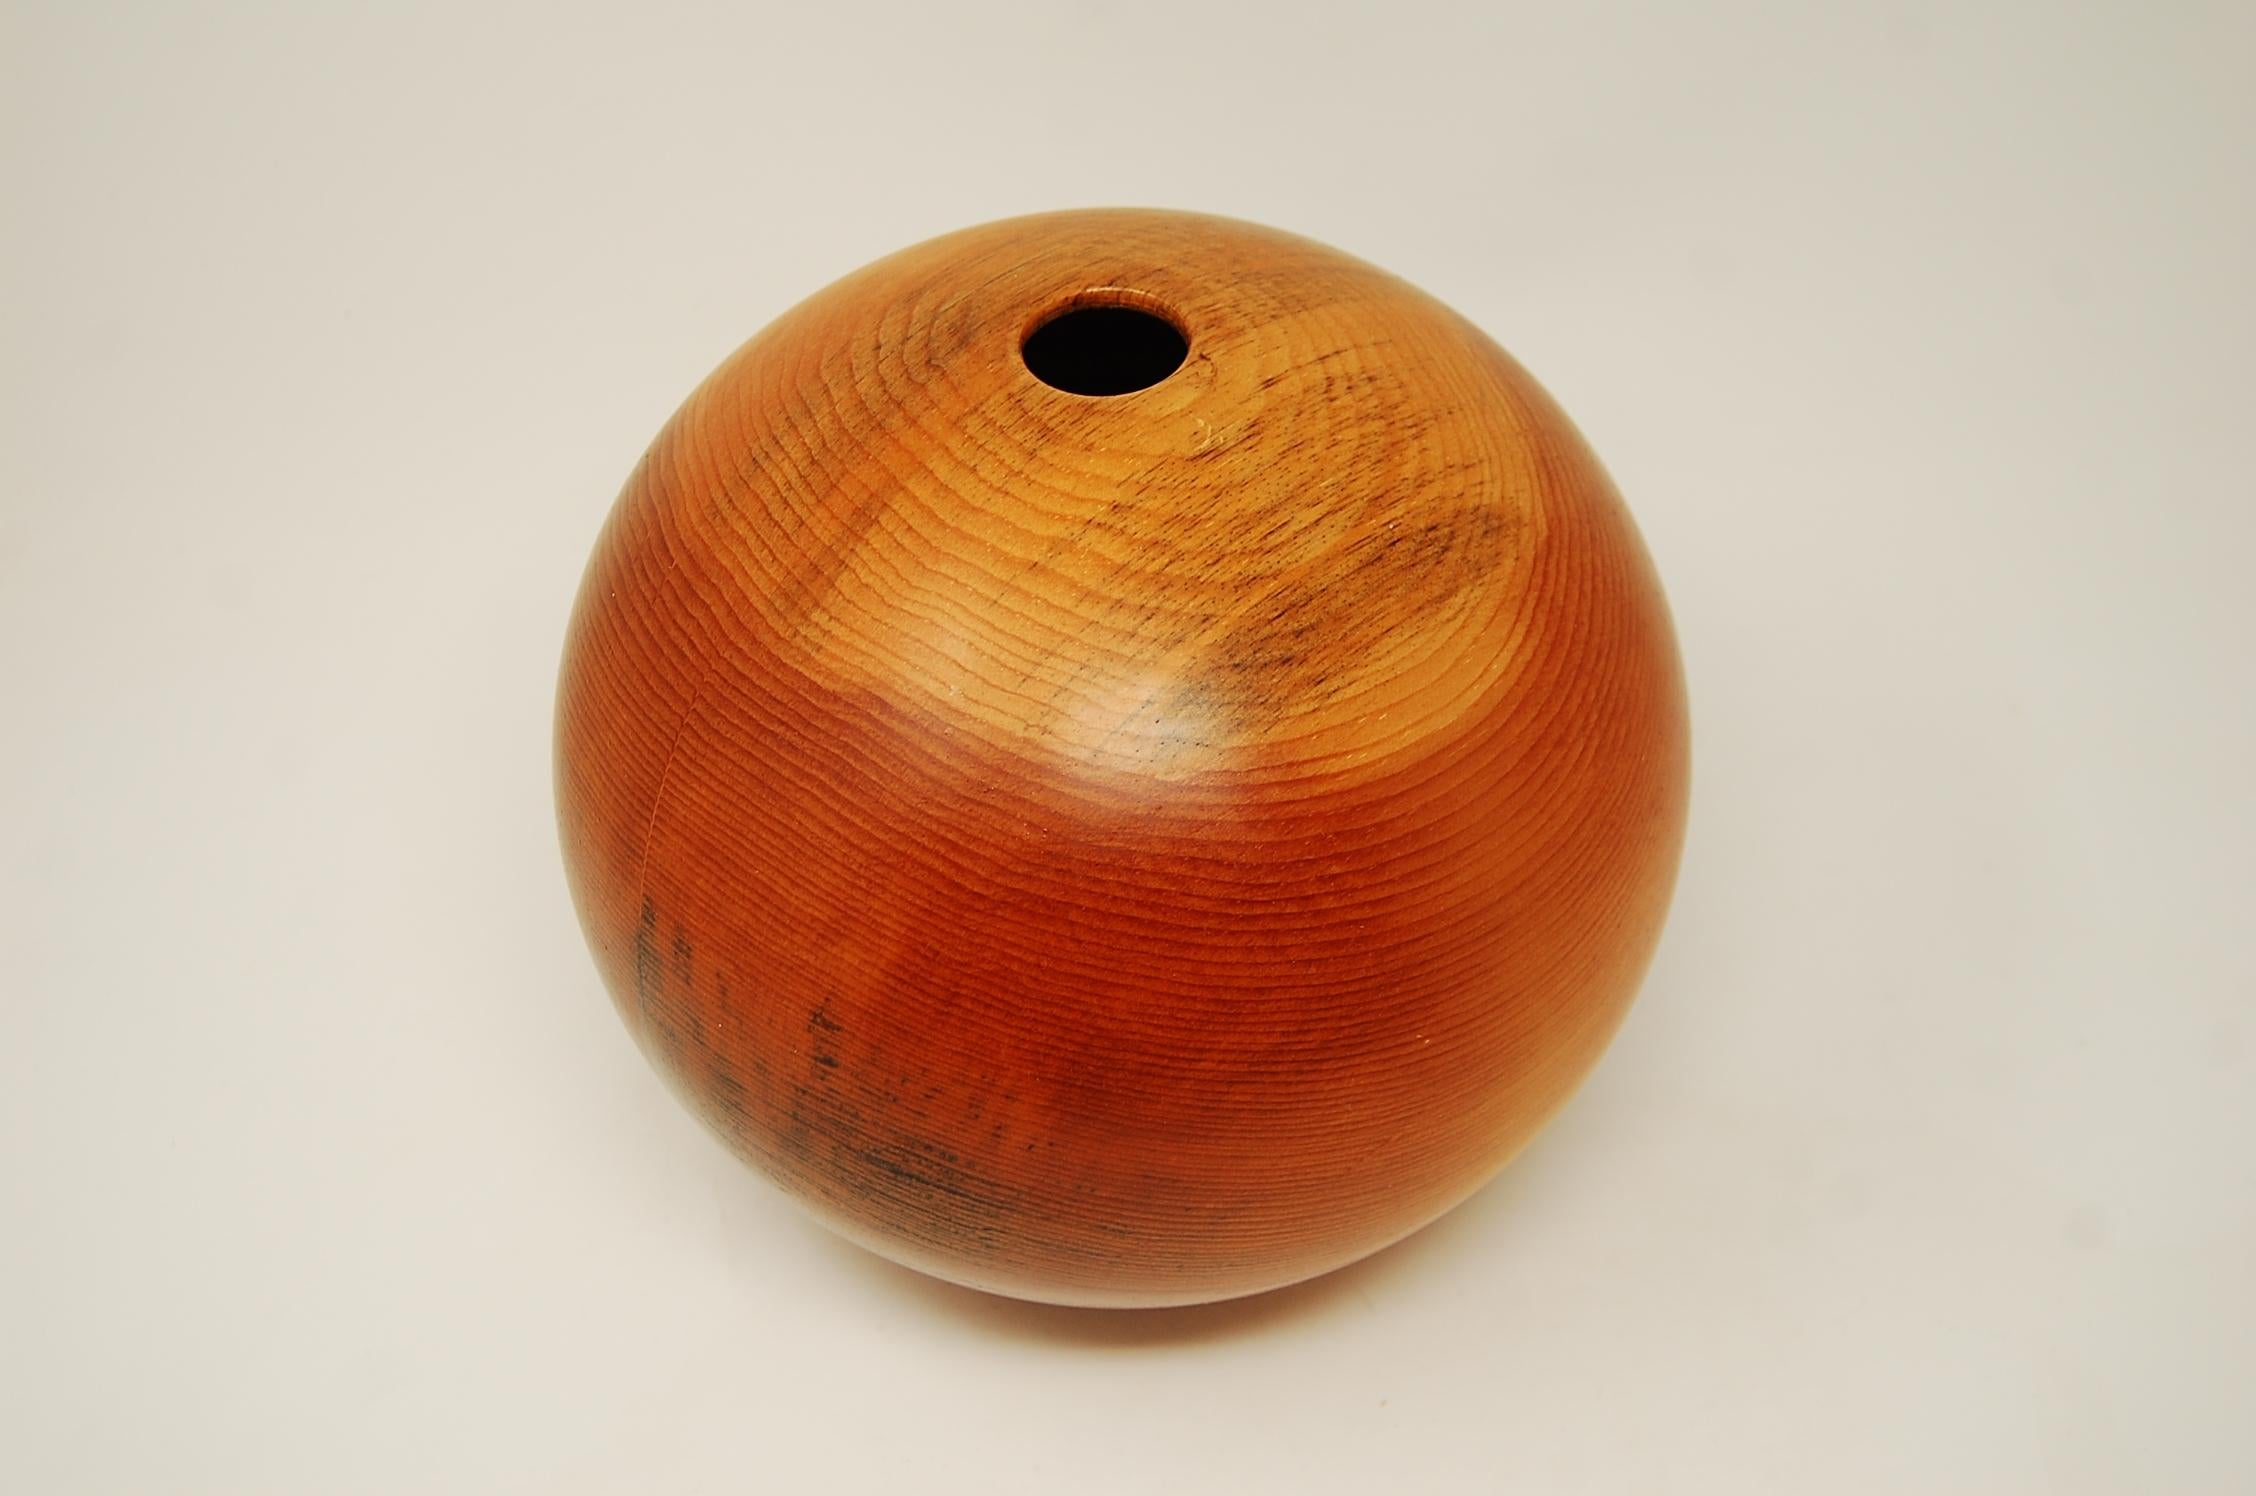 American Craftsman Hollow Form Vase in White Pine by John Sage For Sale